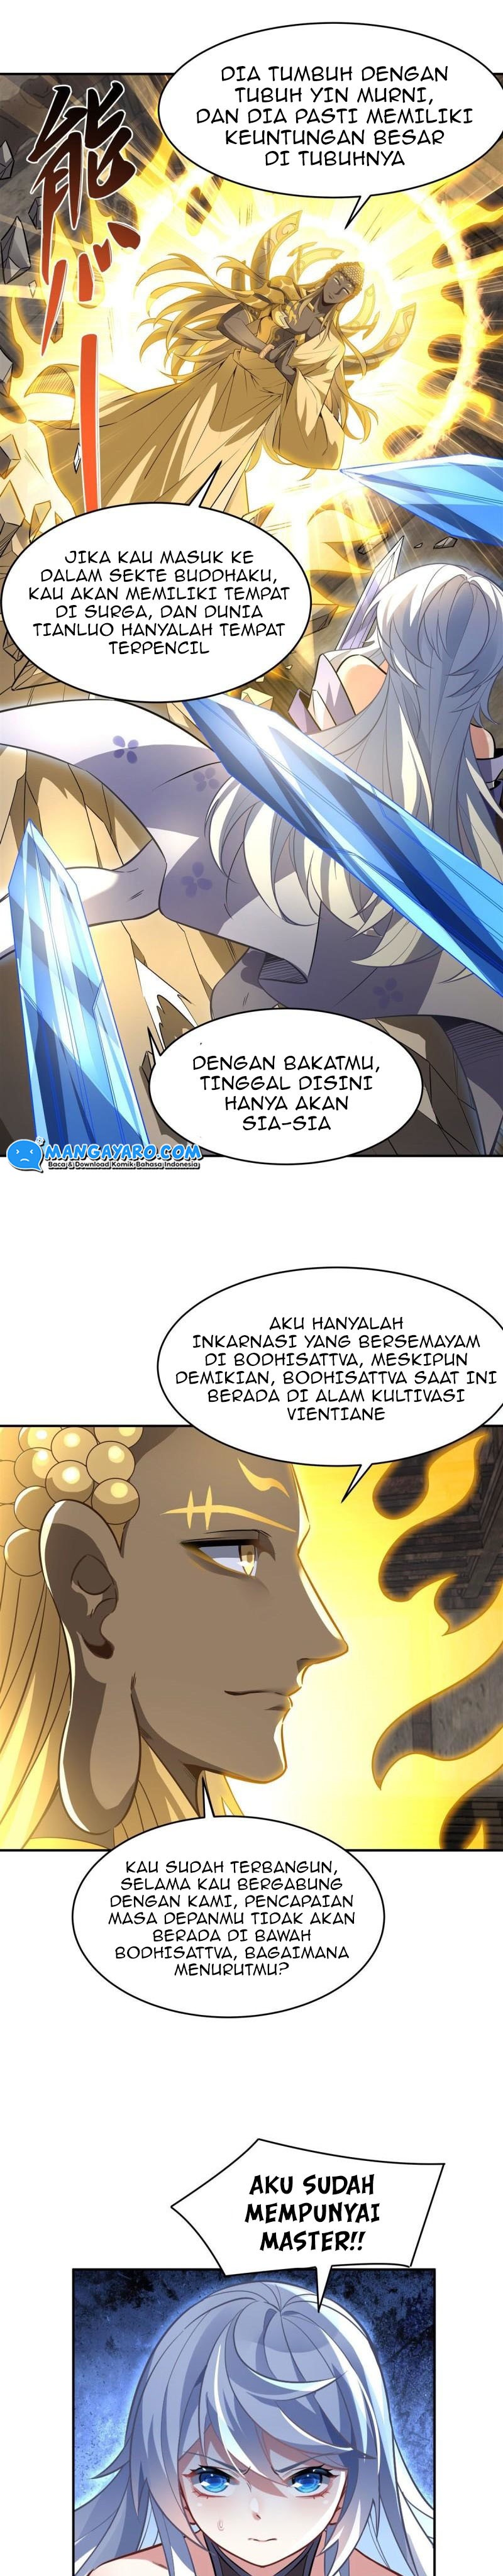 Dilarang COPAS - situs resmi www.mangacanblog.com - Komik my female apprentices are all big shots from the future 067 - chapter 67 68 Indonesia my female apprentices are all big shots from the future 067 - chapter 67 Terbaru 10|Baca Manga Komik Indonesia|Mangacan